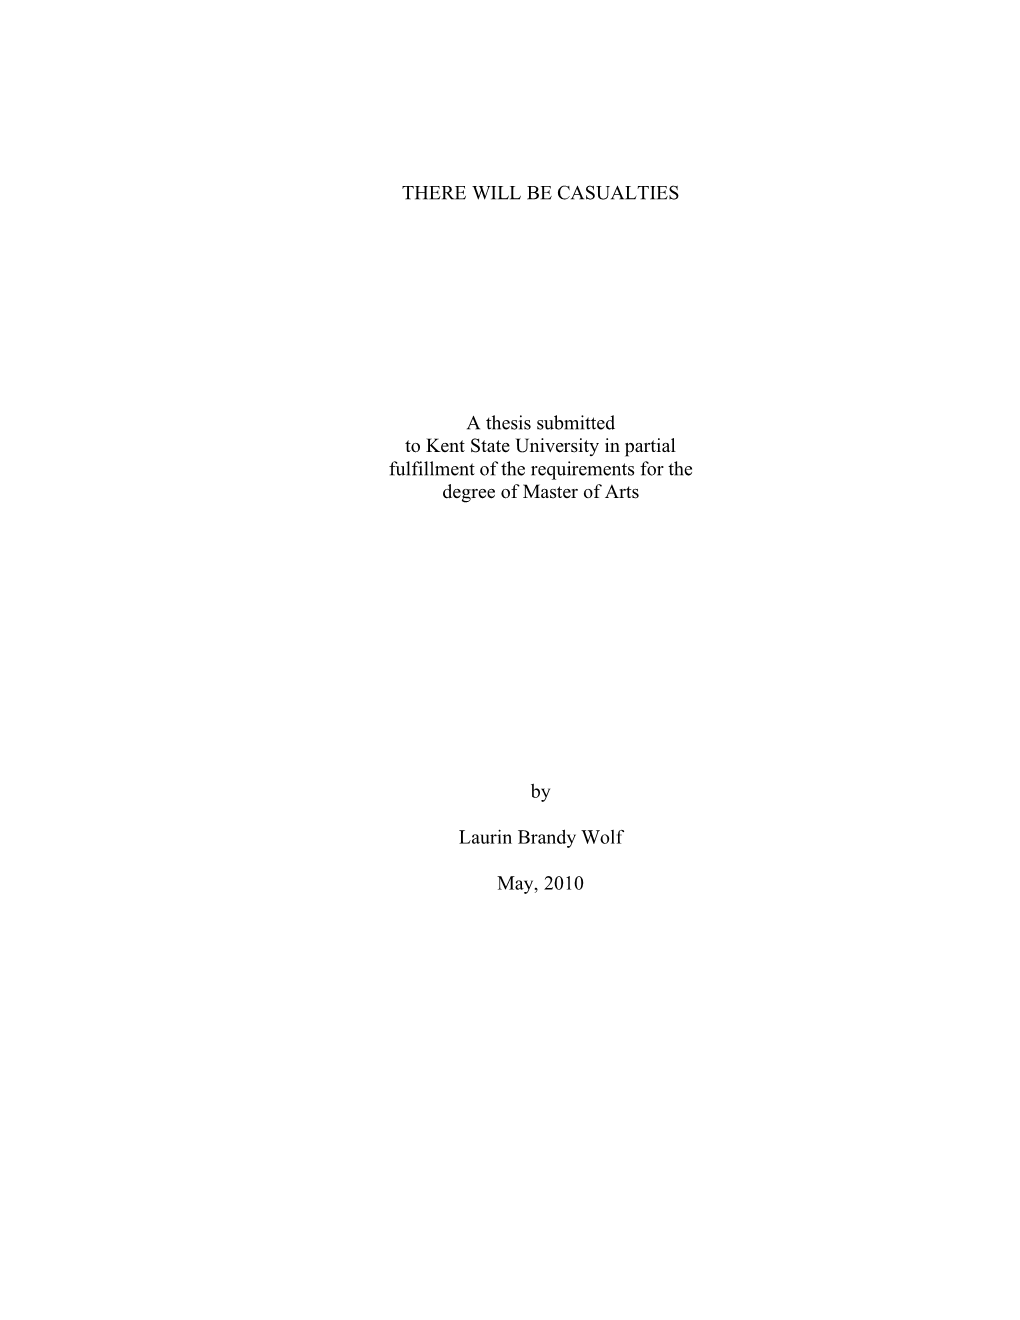 THERE WILL BE CASUALTIES a Thesis Submitted to Kent State